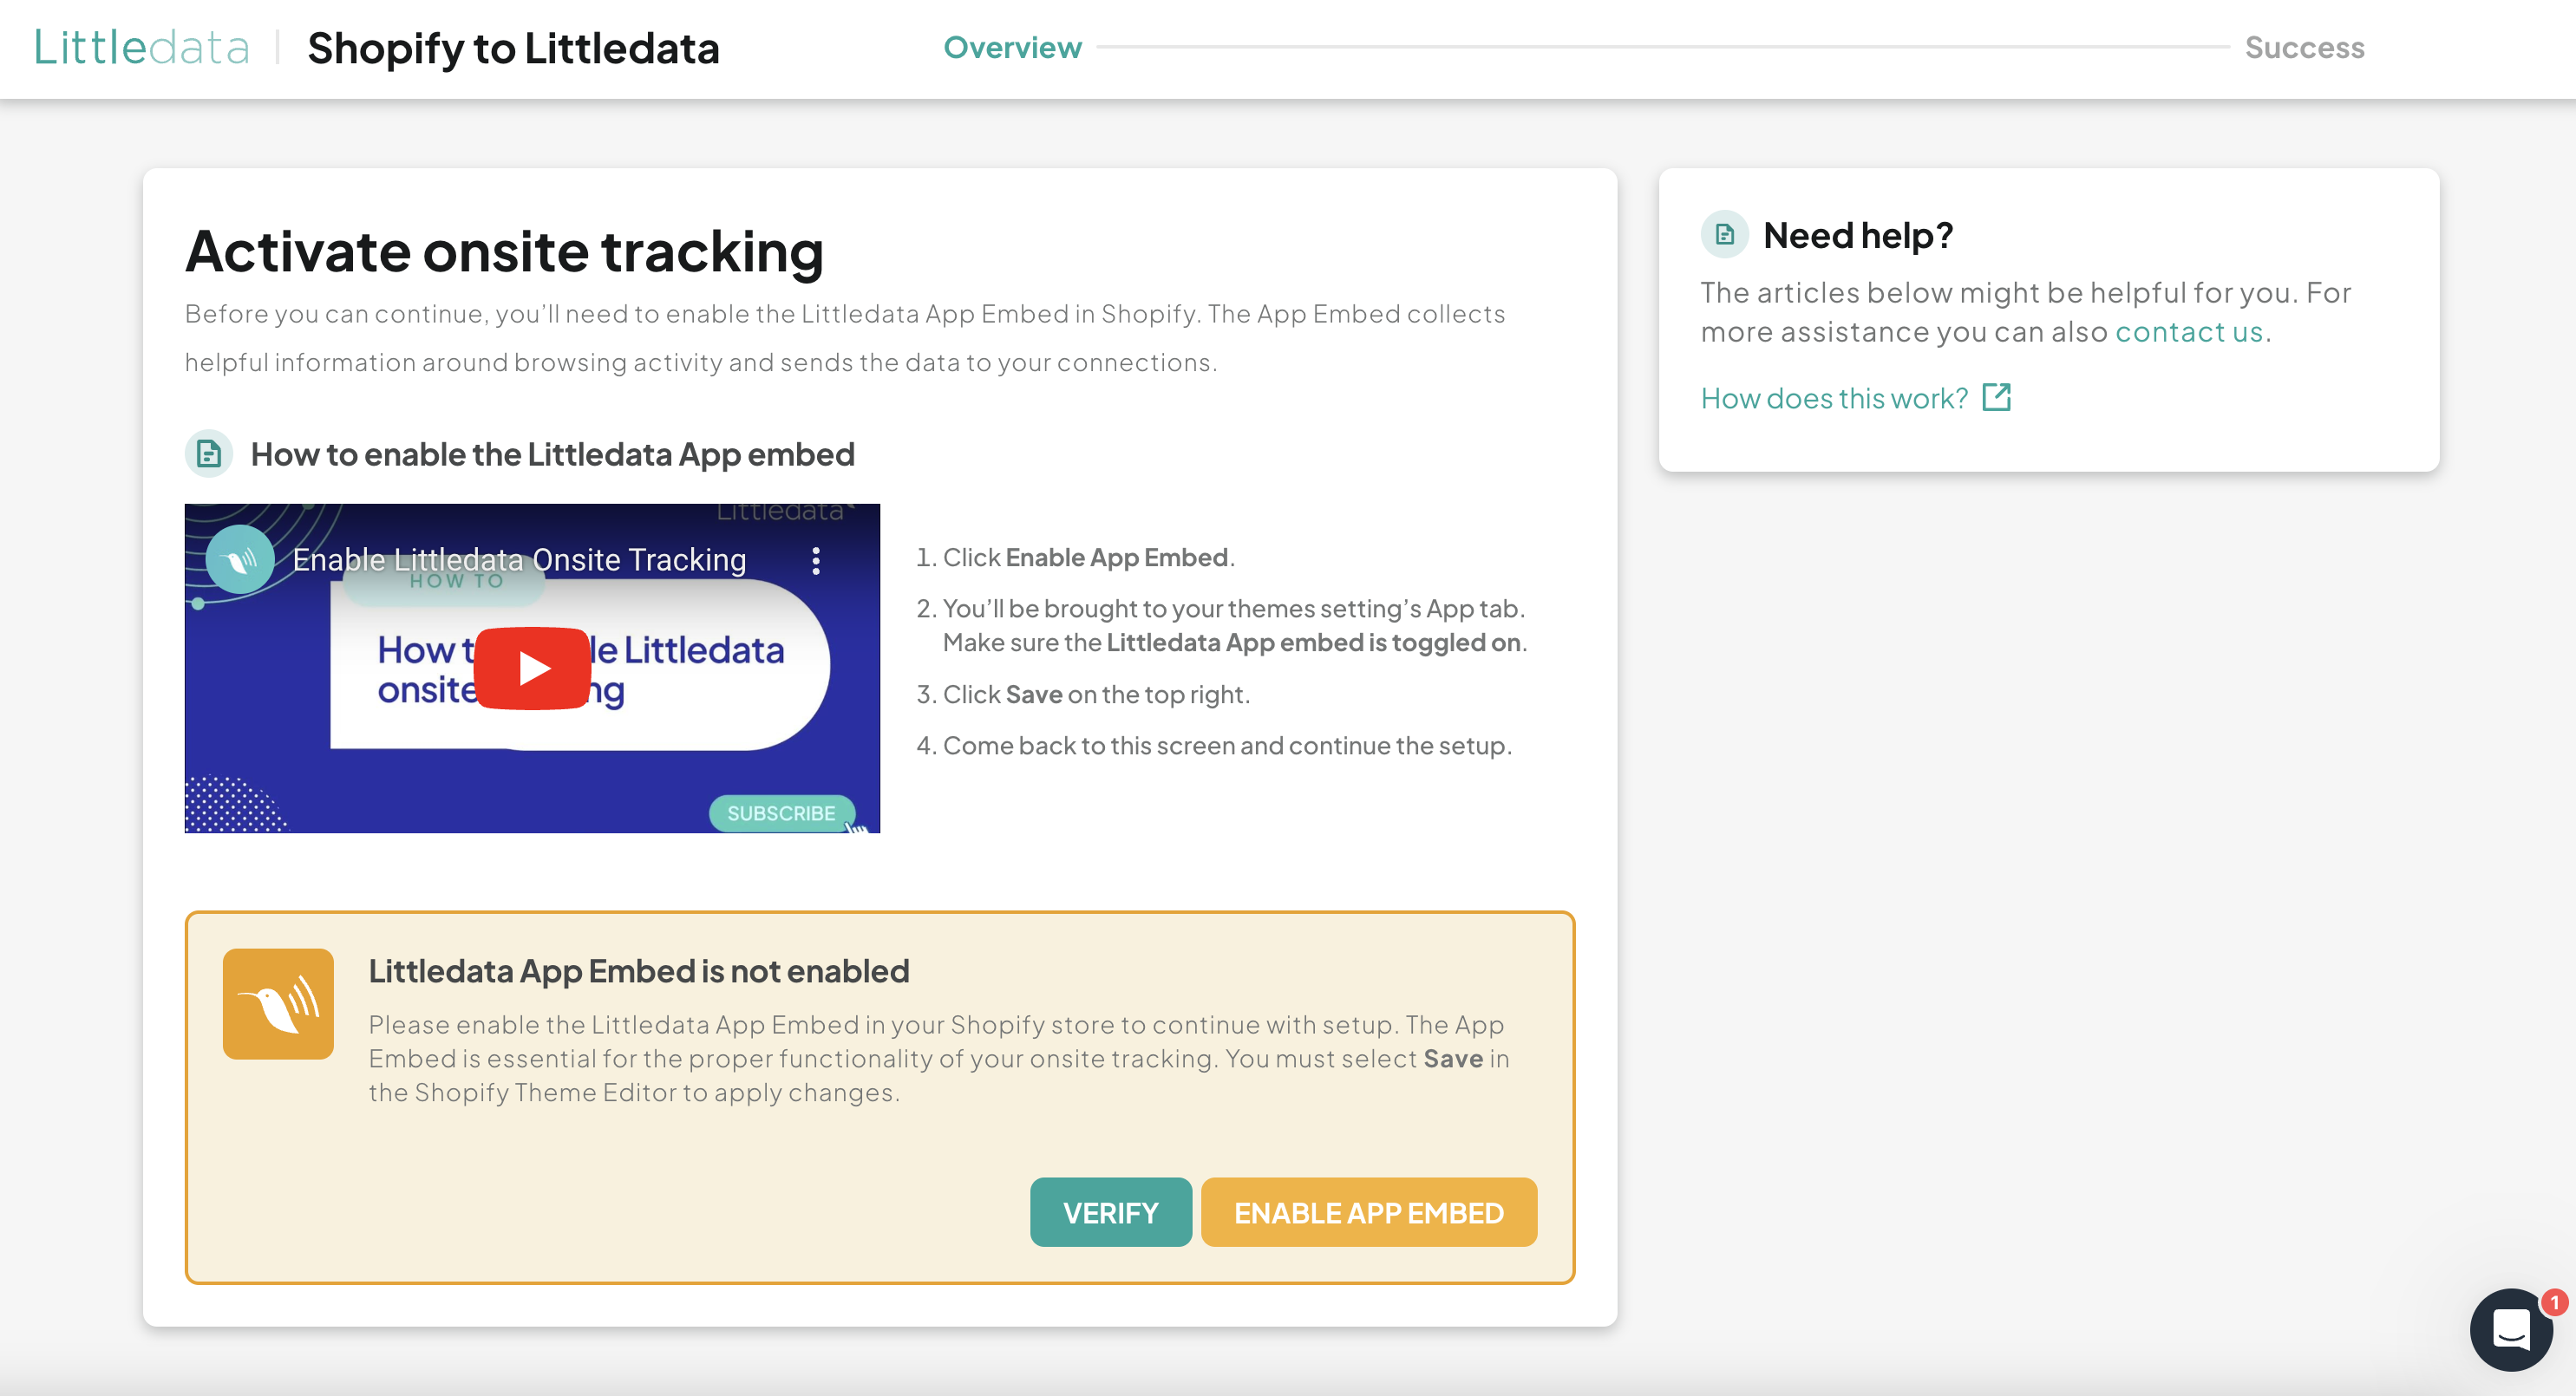 Littledata's in-app guide to enable the app embed